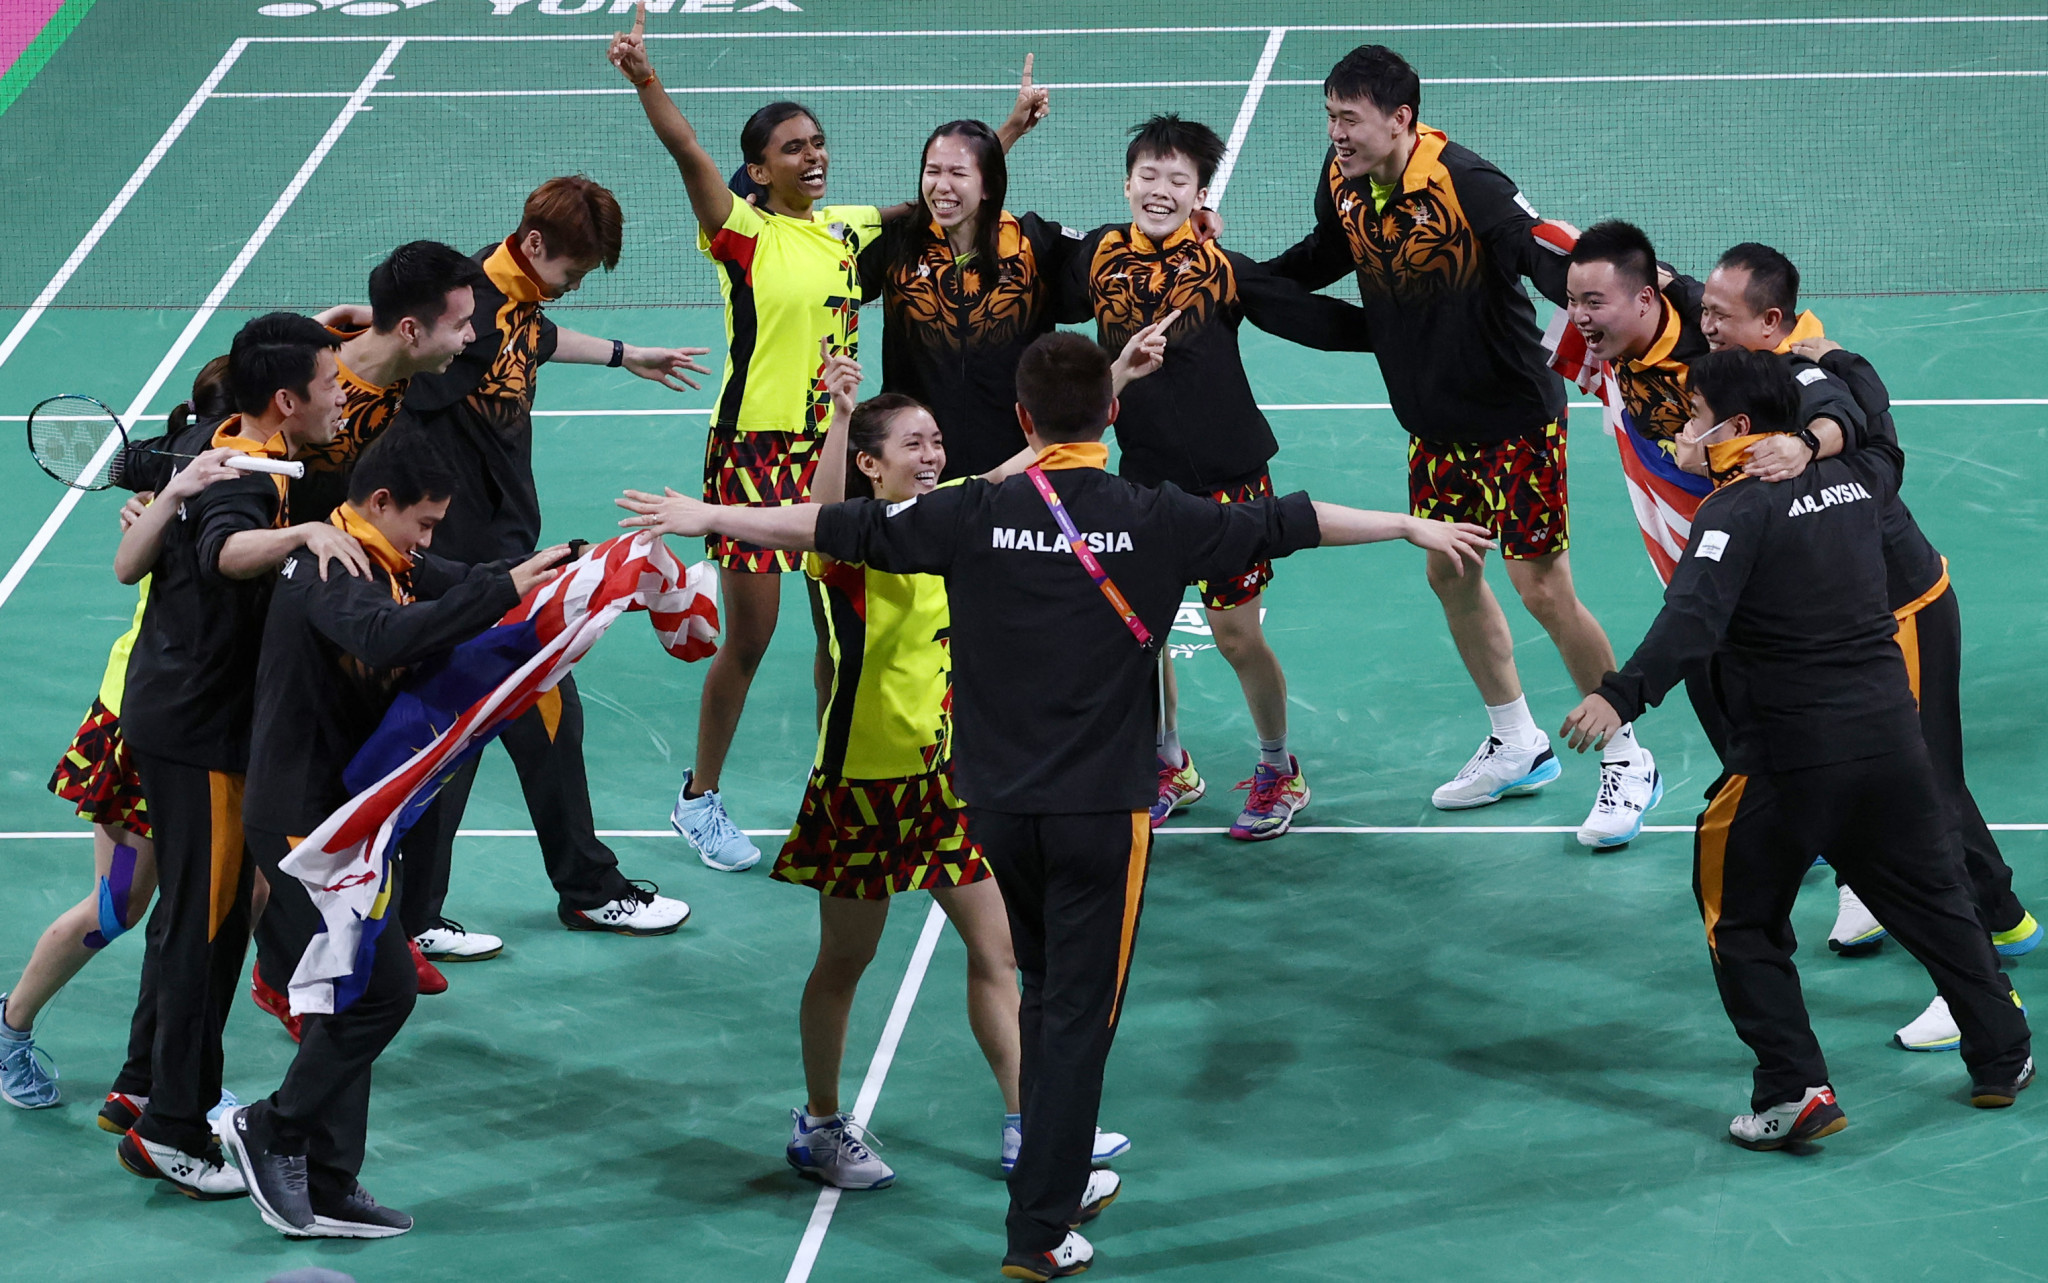 Malaysia were victorious in mixed team badminton, celebrating their gold medal afterwards ©Getty Images